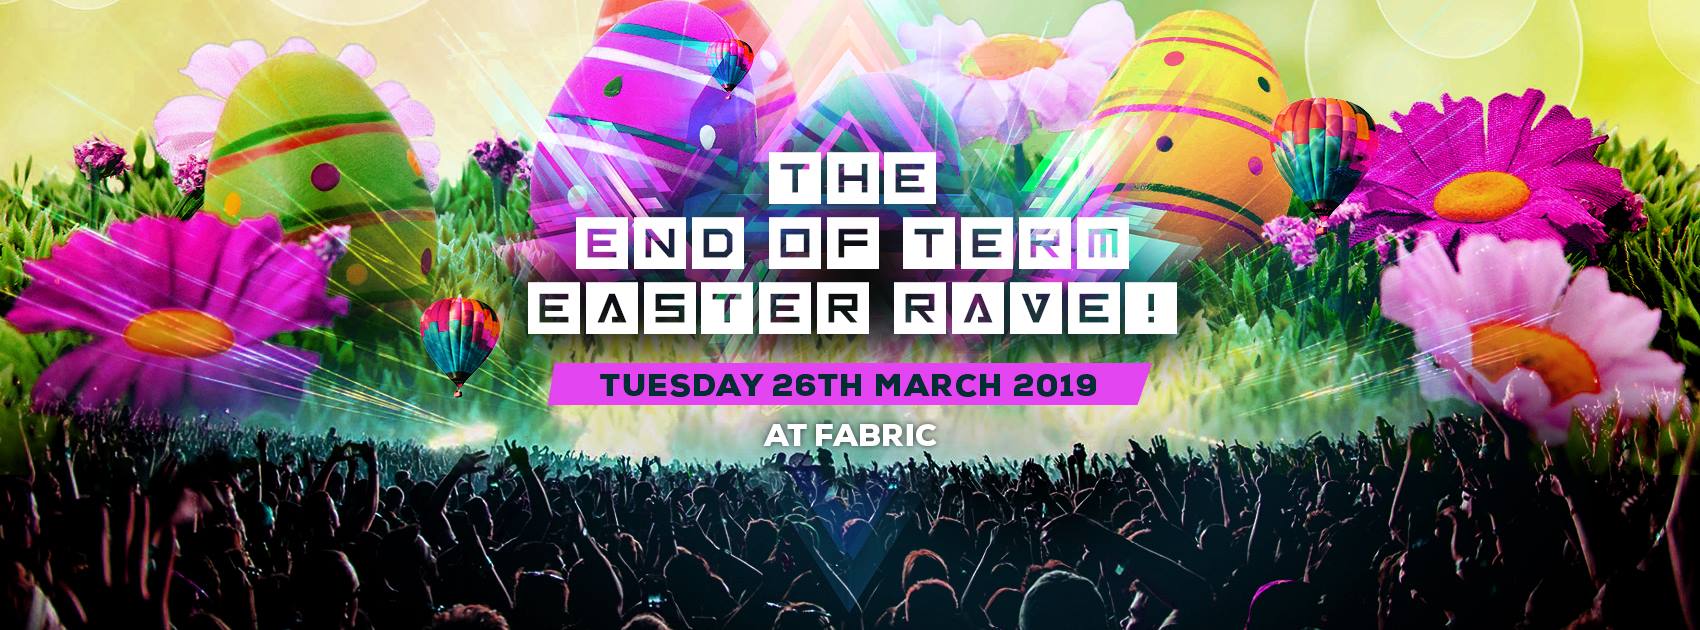 The End Of Term Easter Rave 50 £5 Tickets Left At Fabric London On 26th Mar 2019 Fatsoma 5971